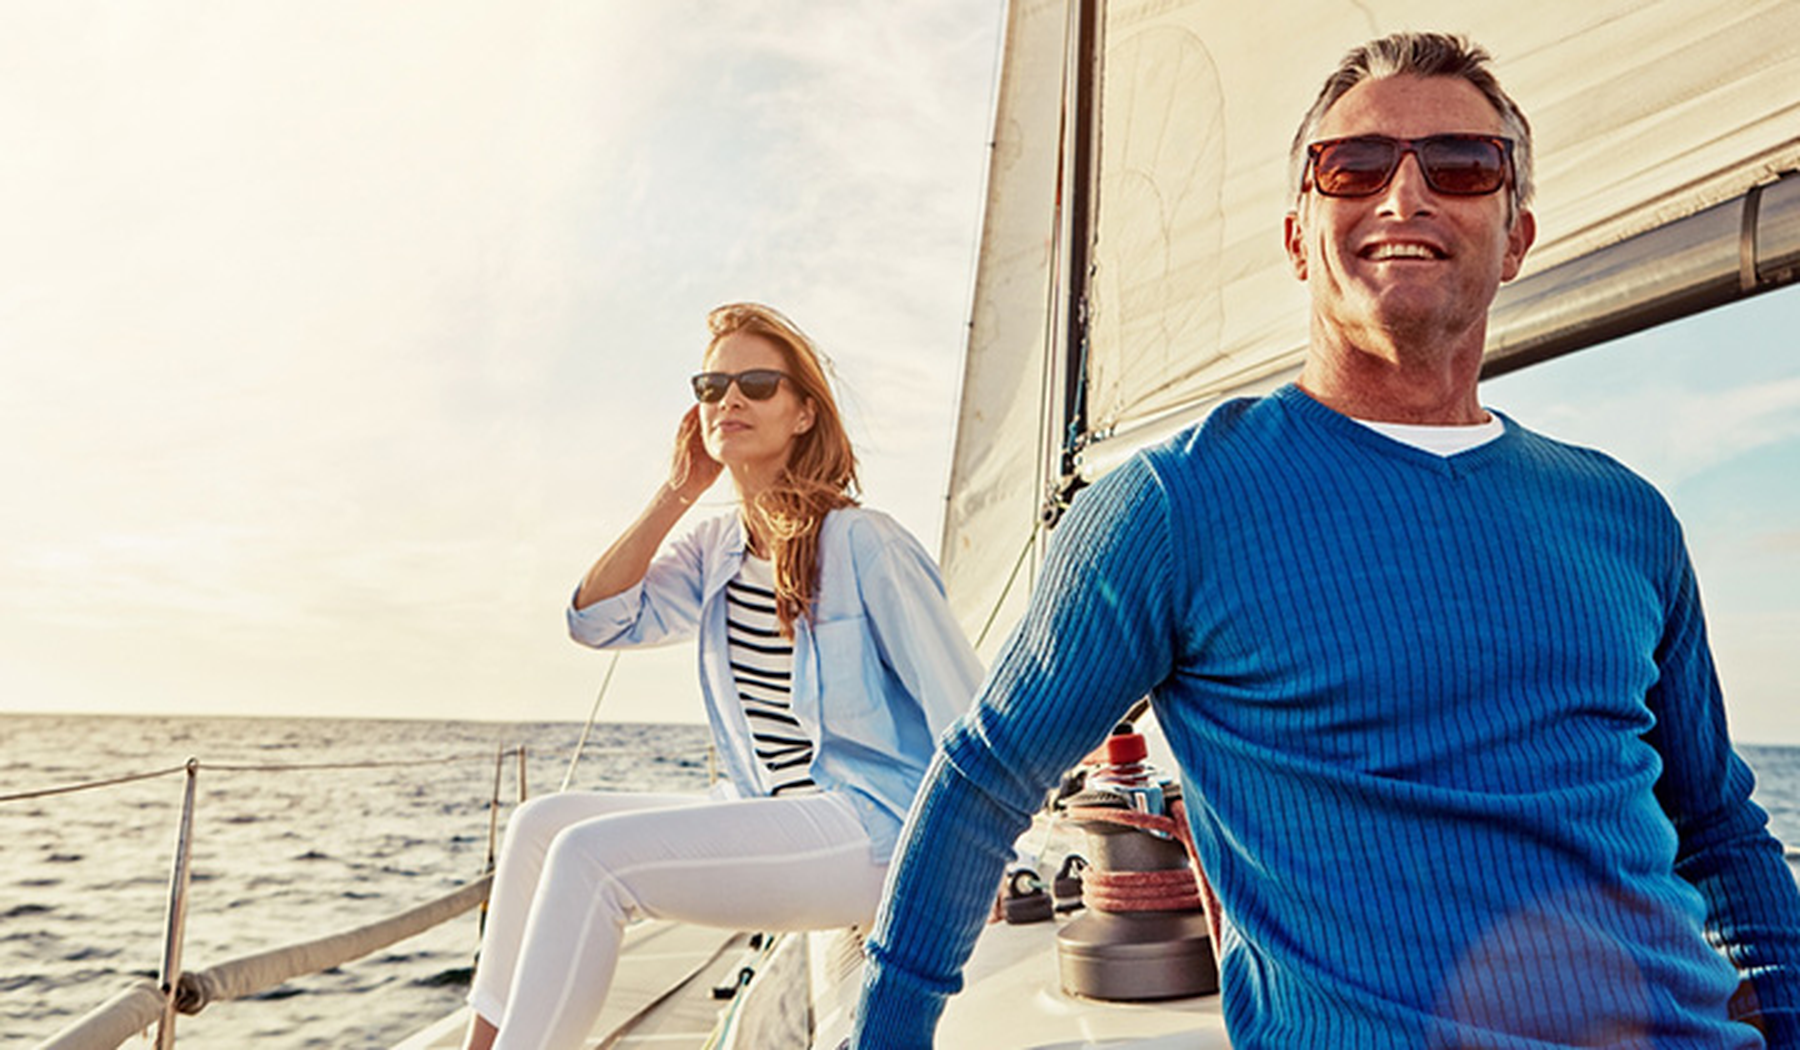 Man and woman wearing sunglasses on a sailboat